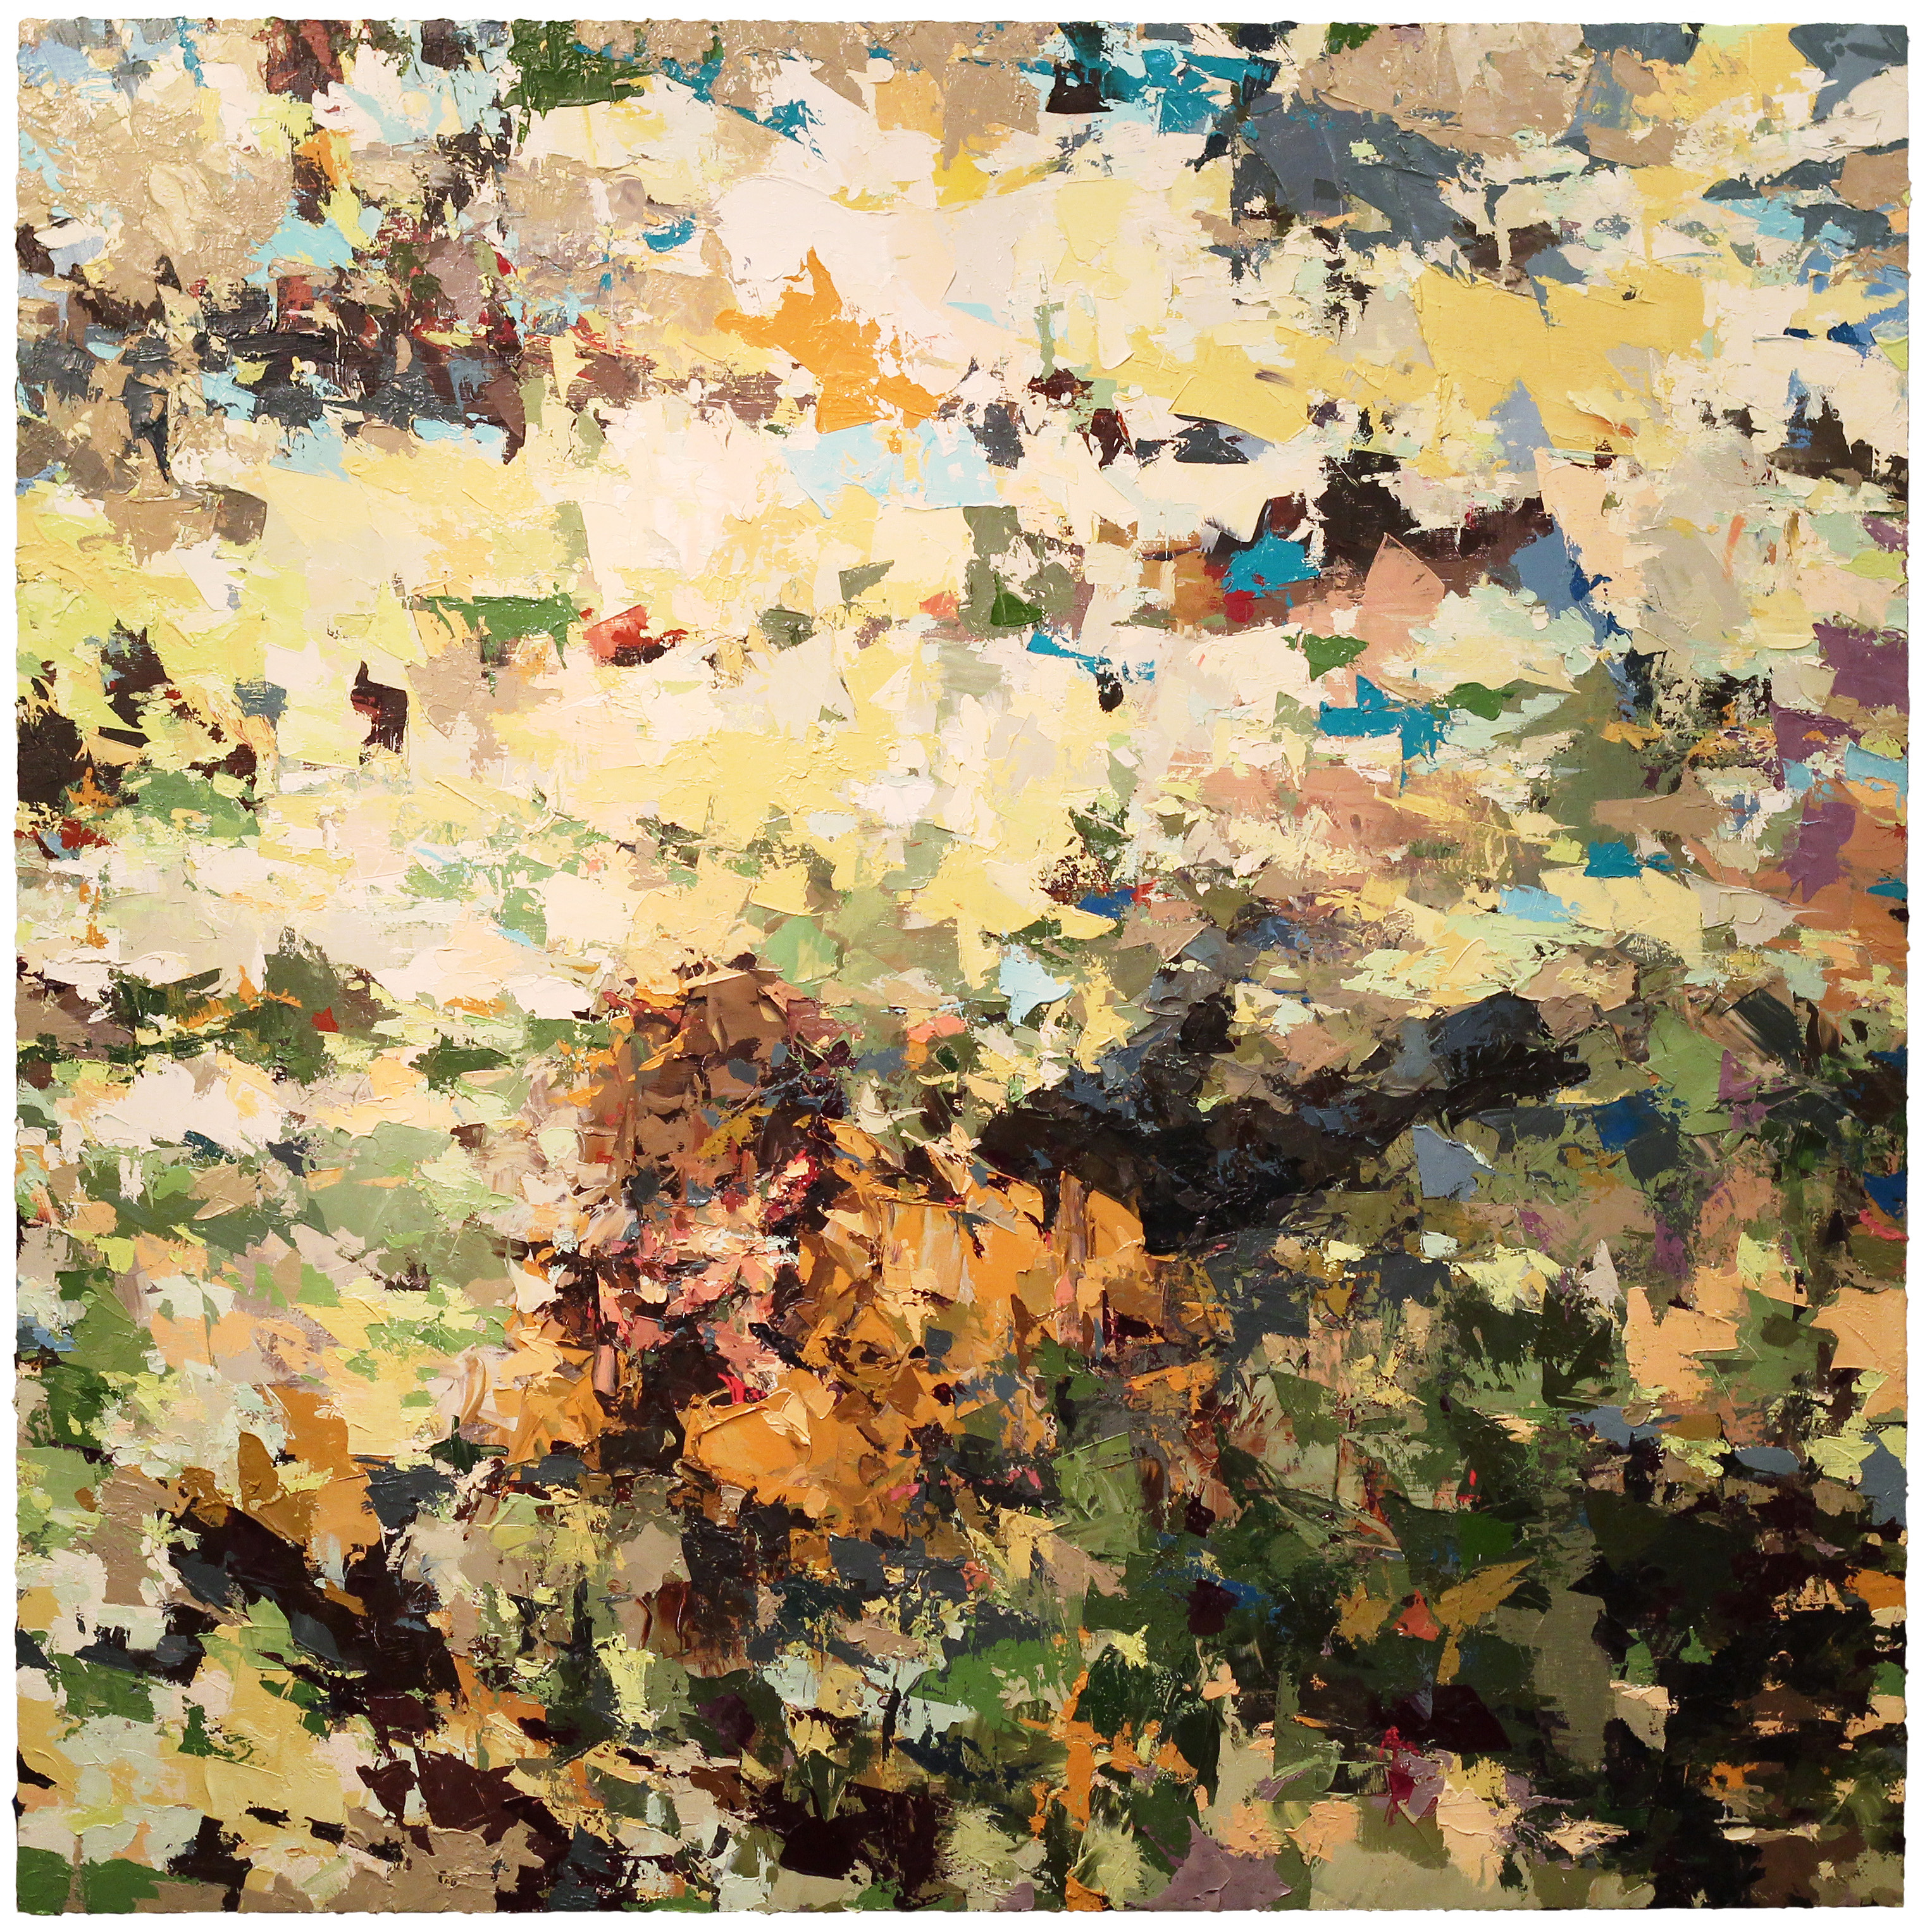 "Undergrowth," 2013, oil on canvas, 36 x 36 in.